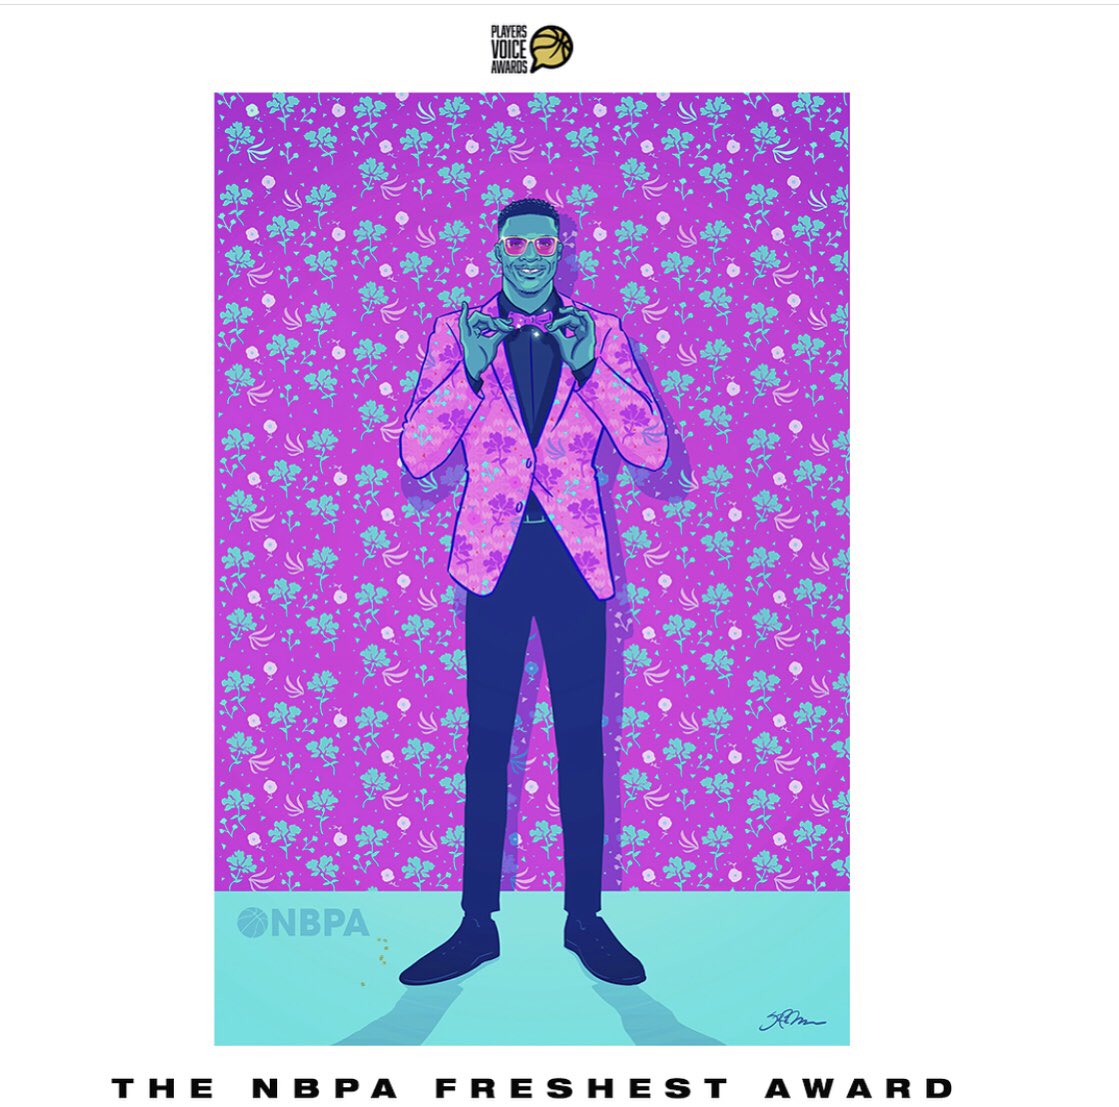 Congrats to @russwest44 for being voted @TheNBPA Freshest!  Players Voice Awards - reg season awards voted on #fortheplayersbytheplayers #weare450 #playersvoice #PVAs